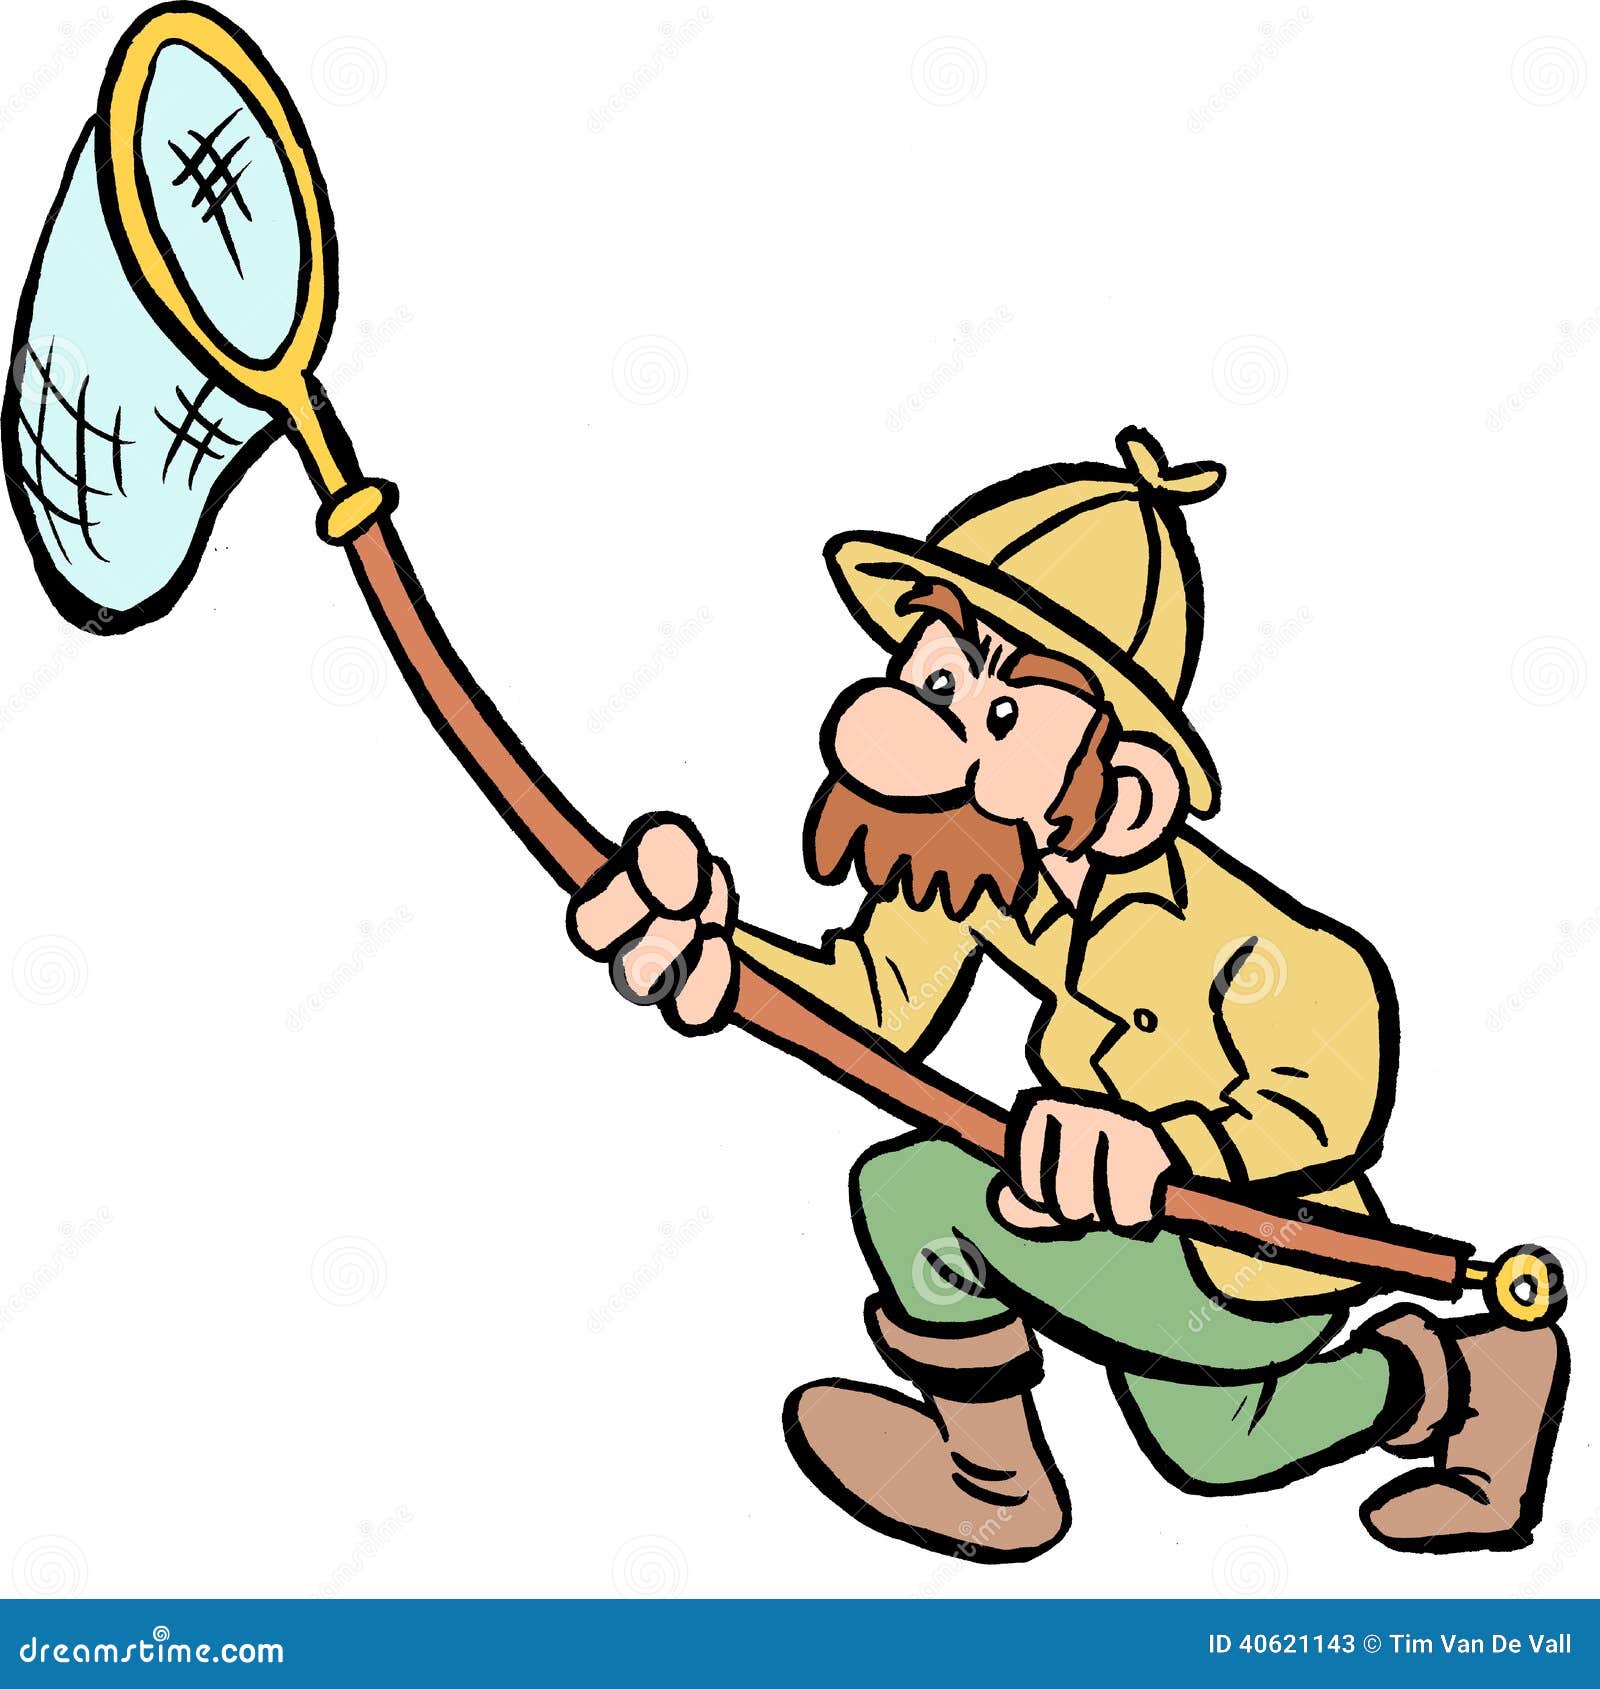 zoologist clipart - photo #15